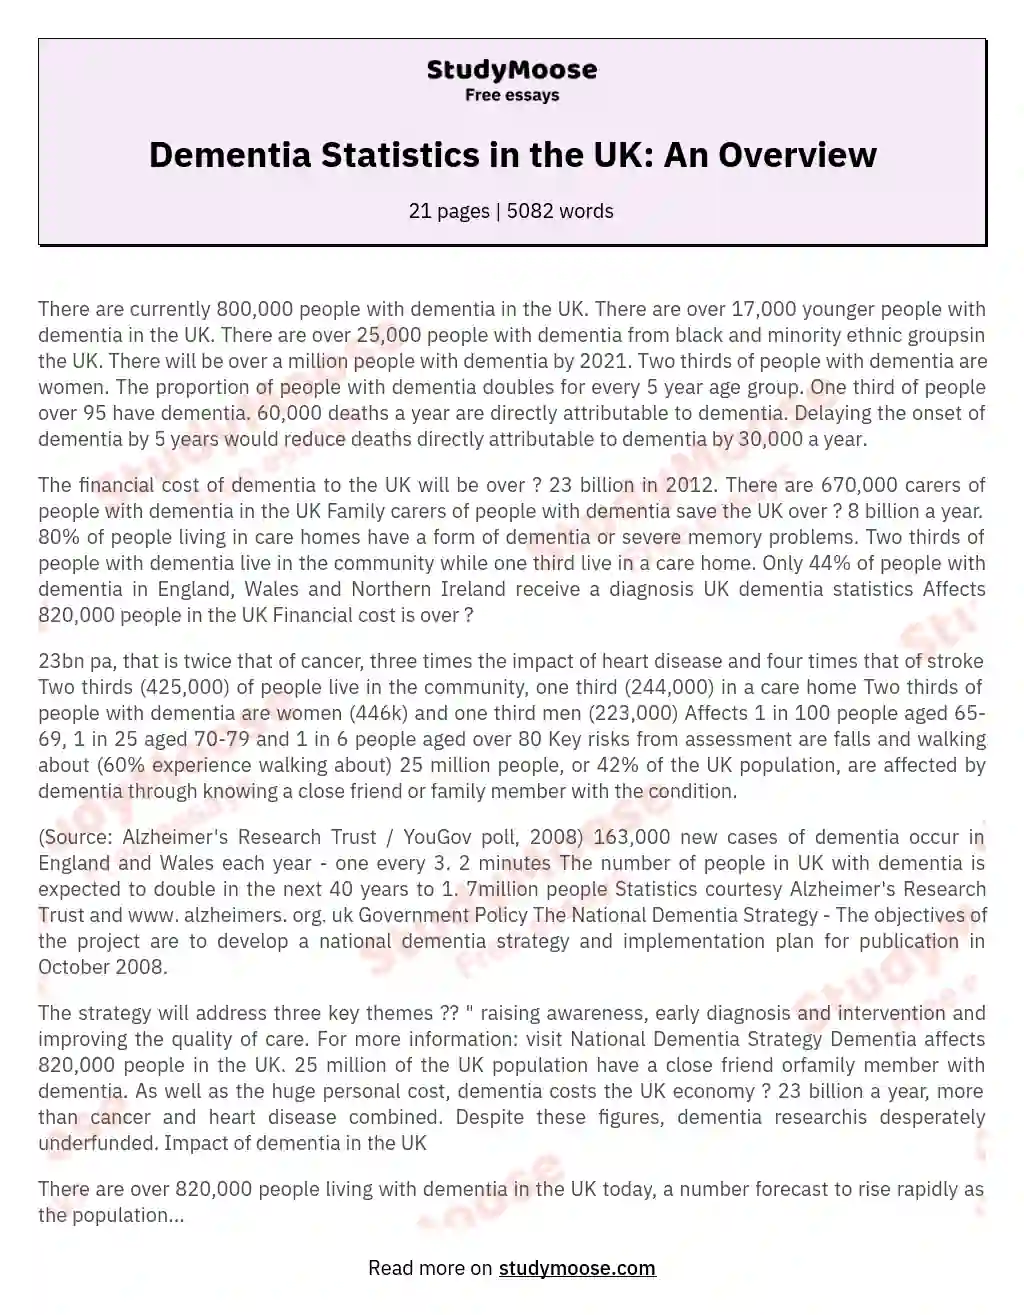 Dementia Statistics in the UK: An Overview essay